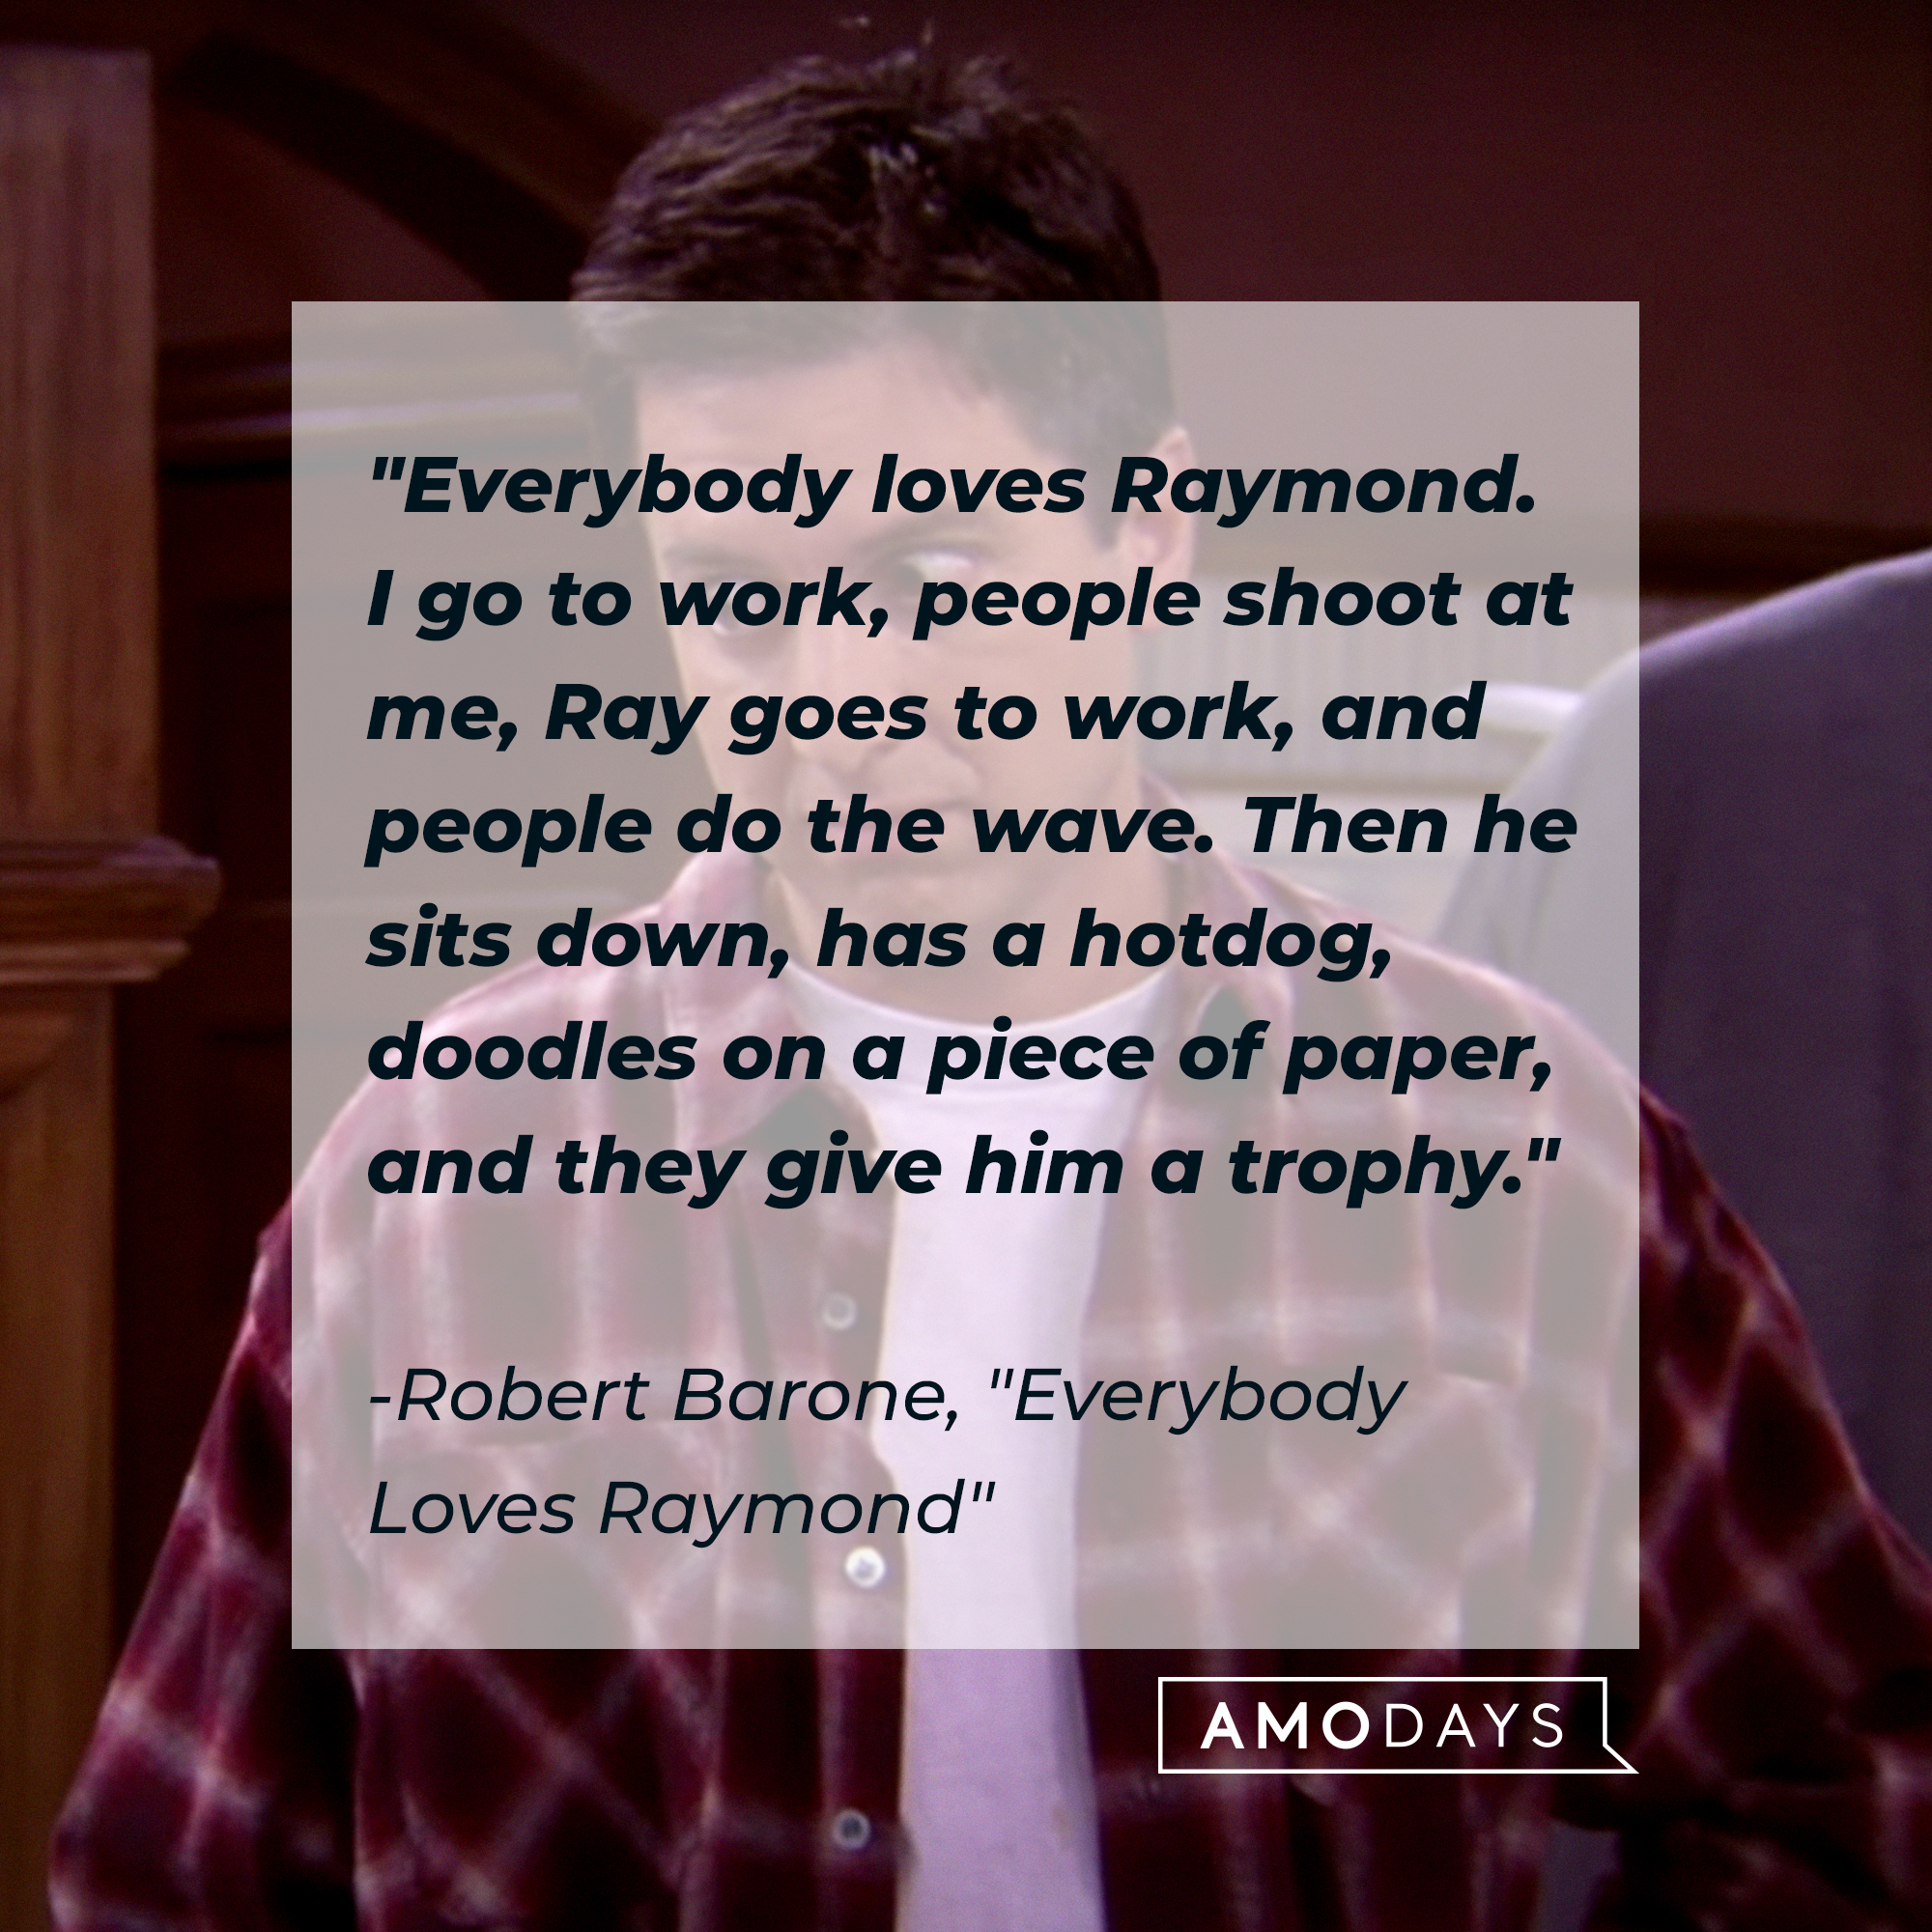 "Everybody Loves Raymond" quote, "Everybody loves Raymond. I go to work, people shoot at me, Ray goes to work, and people do the wave. Then he sits down, has a hotdog, doodles on a piece of paper, and they give him a trophy." | Source: Facebook/EverybodyLovesRaymondTVShow